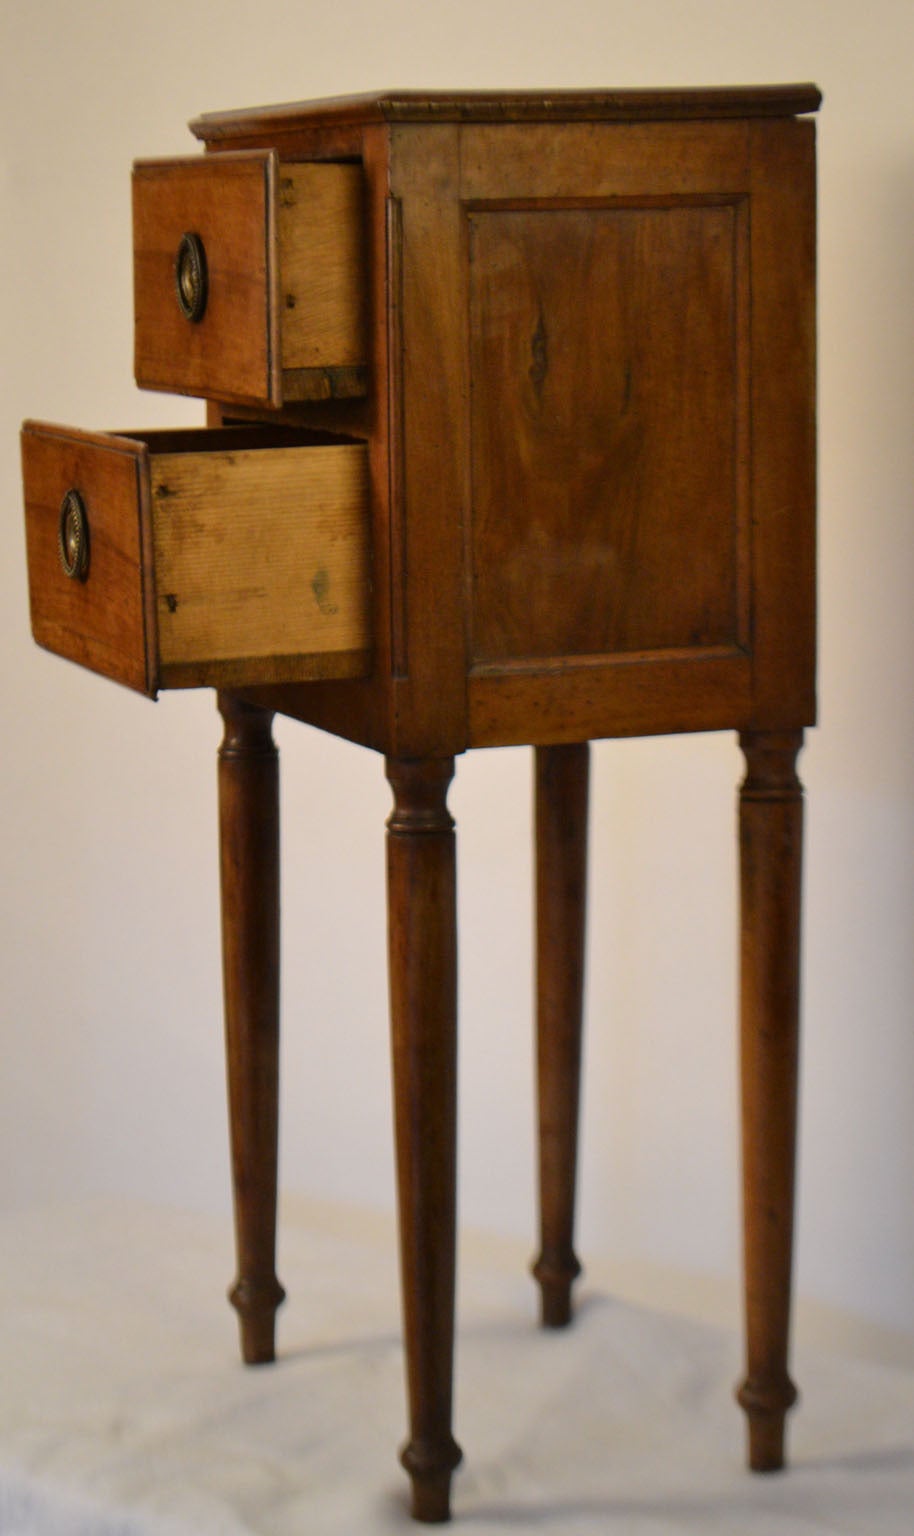 Late 18th century Directoire nightstand with two drawers with beaded circular keyhole plates and simple baluster legs.